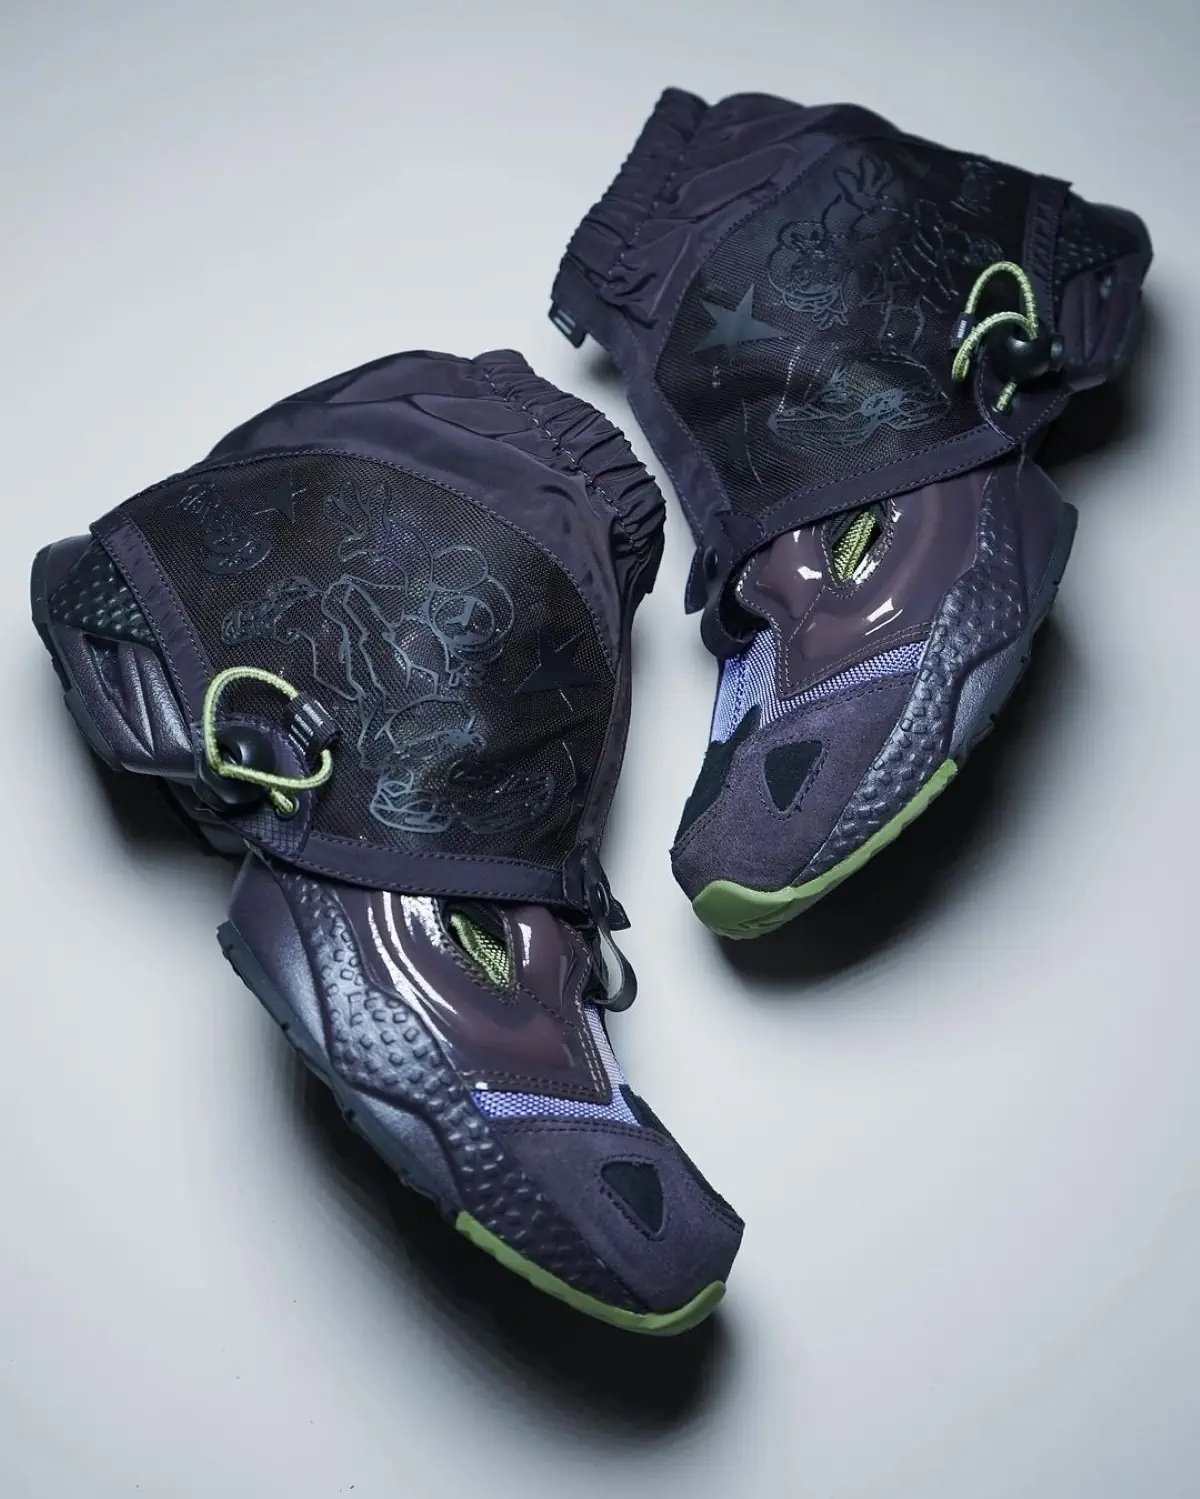 Reebok x Happy99 launch the Instapump Fury 95 sneakers, combining futuristic design with customizable features